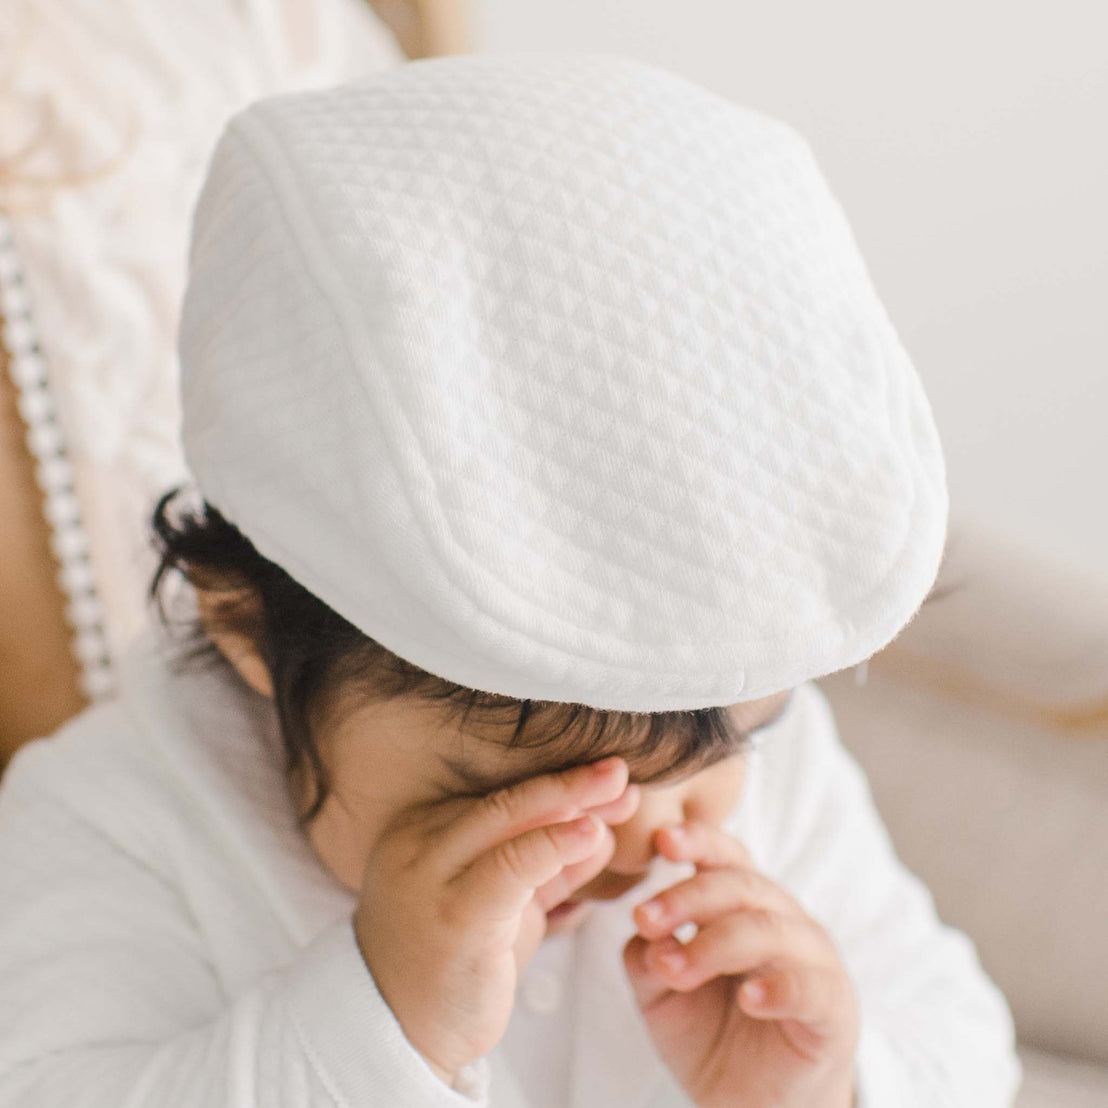 Baby boy wearing the Elijah Newsboy Cap. The photo shows the top of the hat and the white textured cotton that it is crafted from